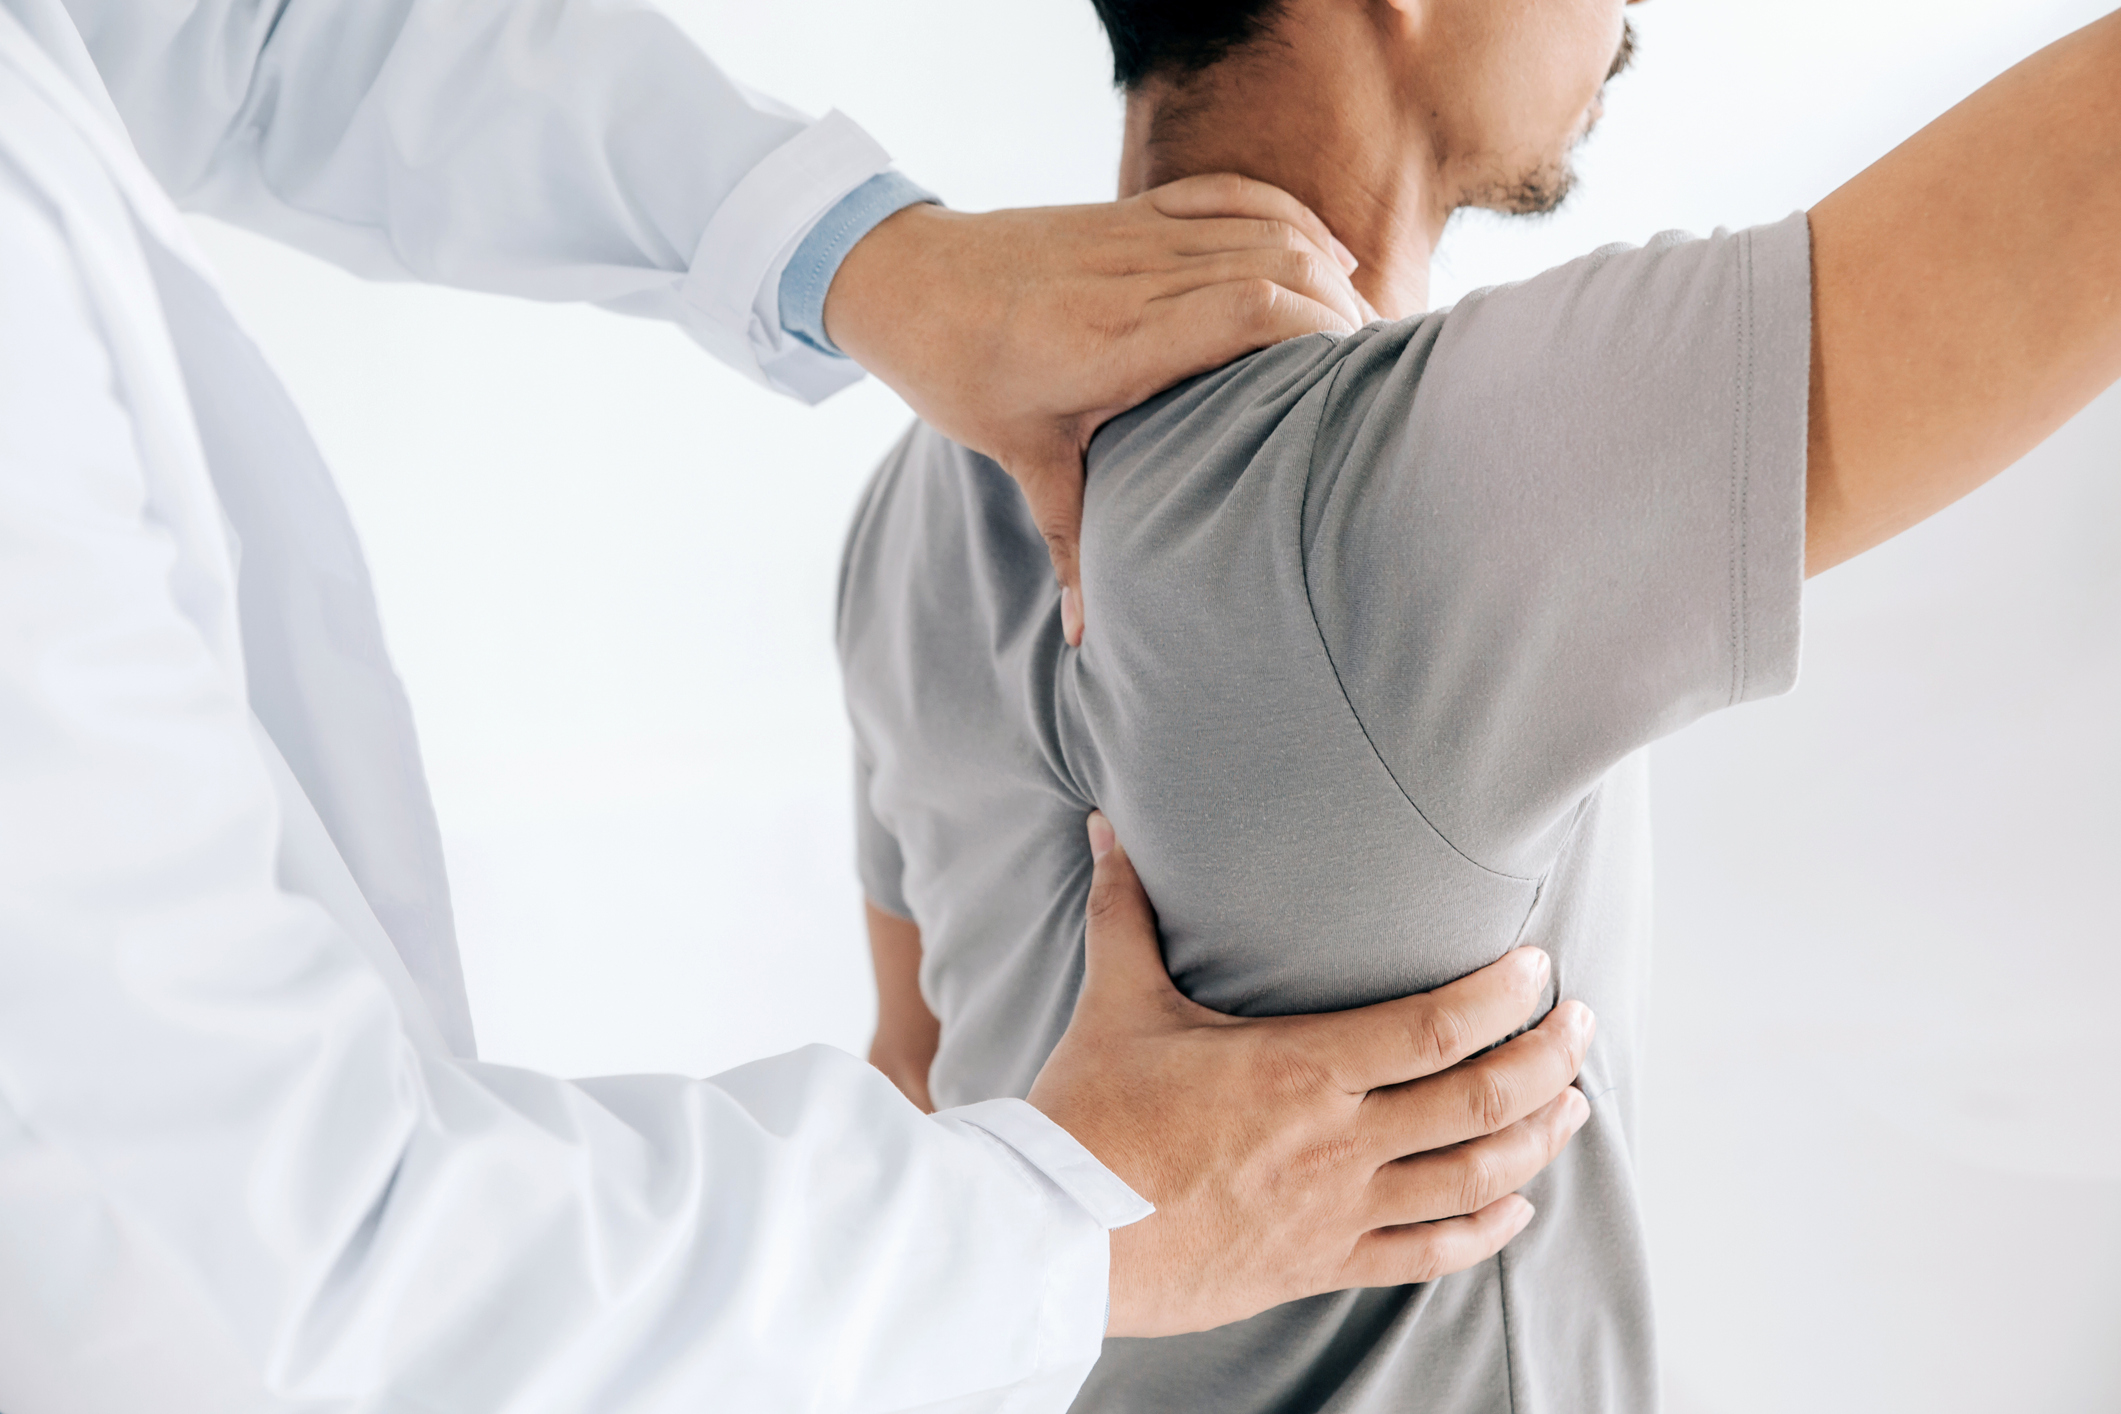 Treating Shoulder Pain Without Surgery